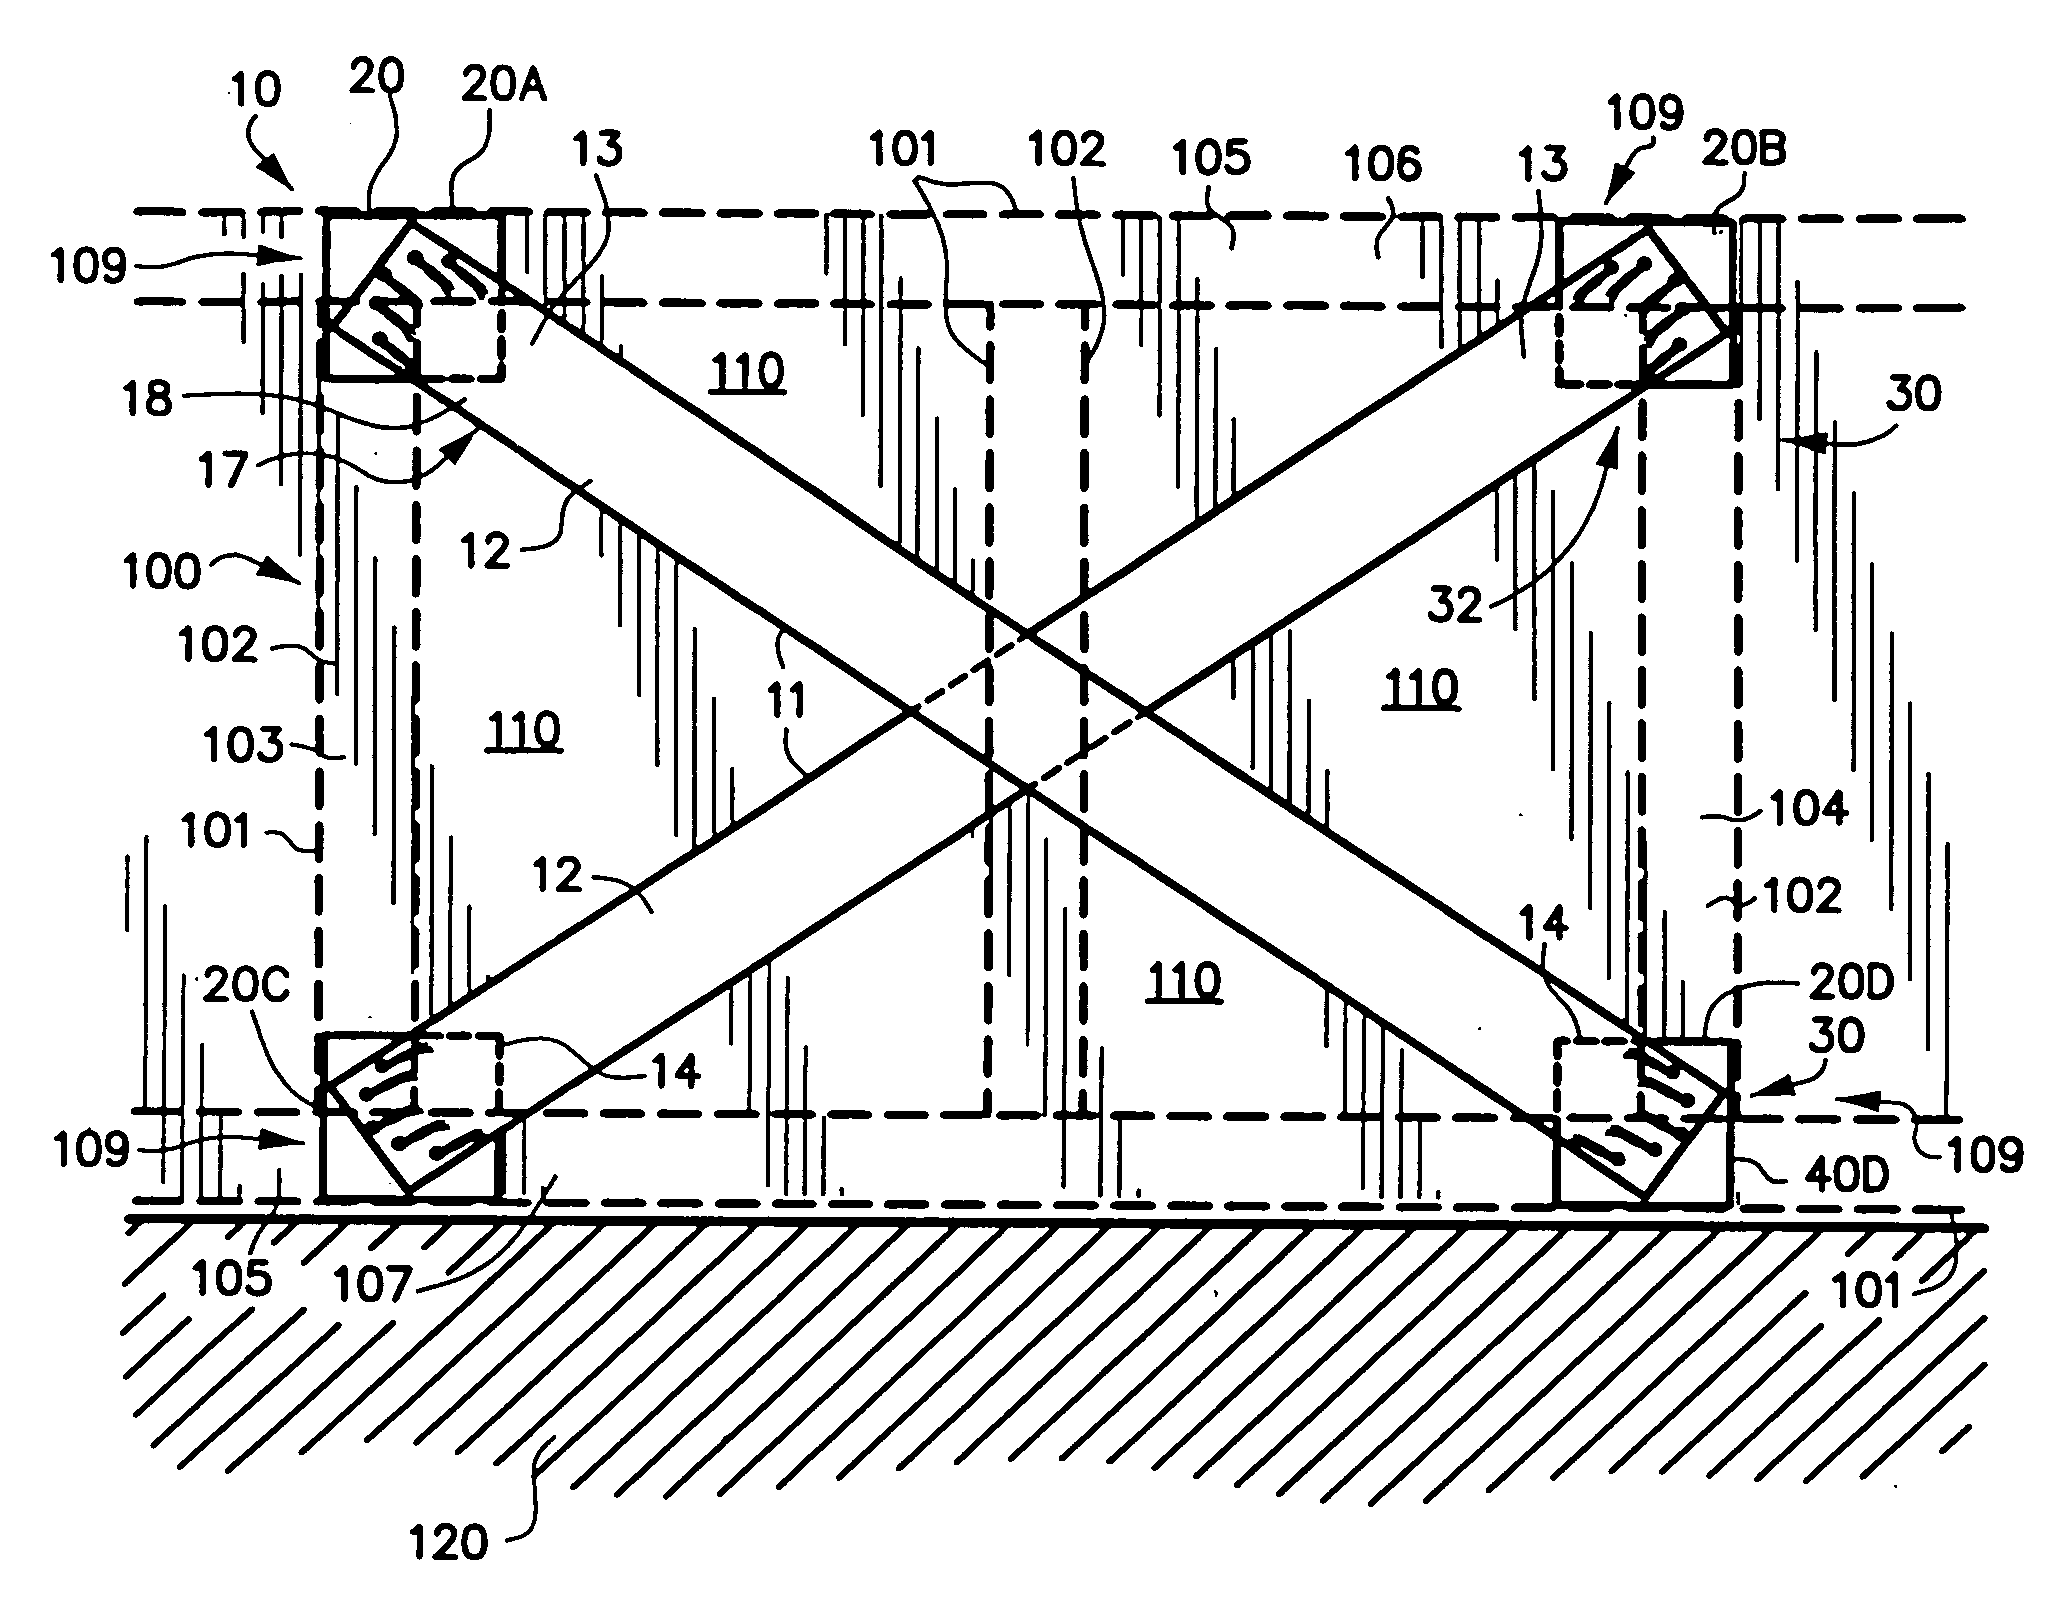 System and method for reinforcing structures